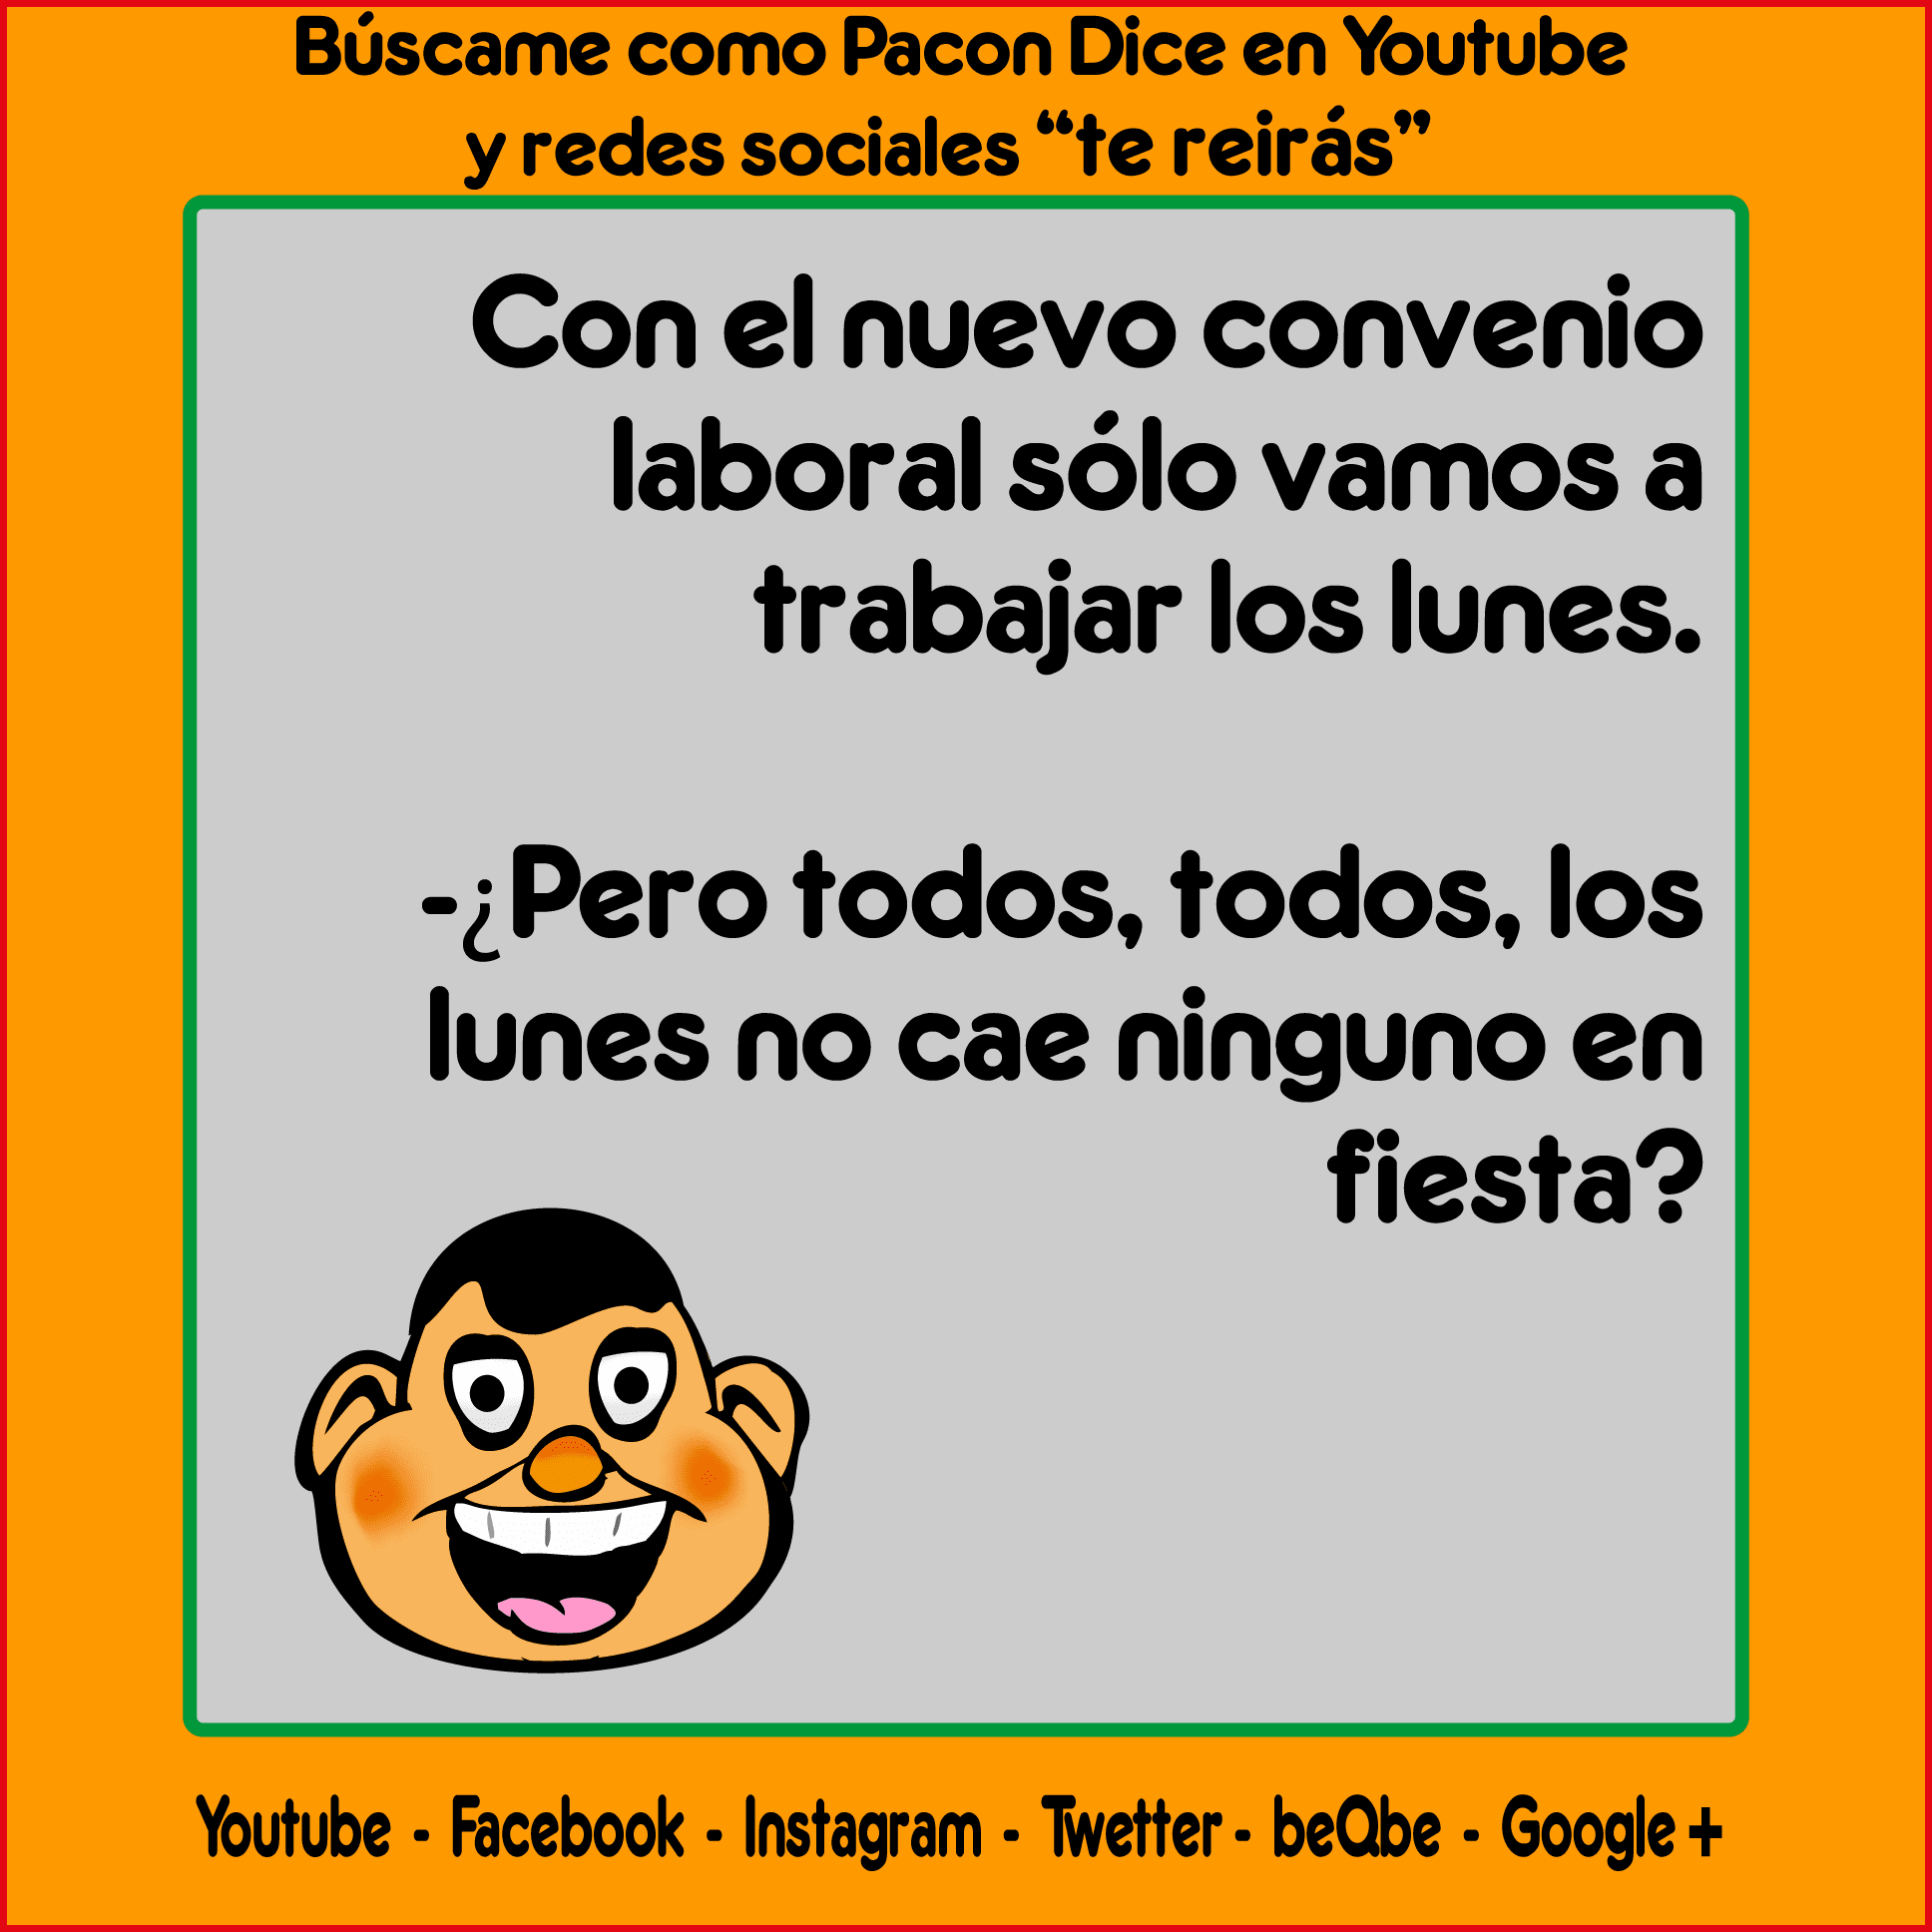 Con el nuevo convenio laboral, solo vamos a trabajar los lunes.  ¿Pero... Todos, todos, los lunes, no cae ninguno en fiesta?  With the new labor agreement, we are only going to work on Mondays.  But ... Everybody, every Monday, does not one fall for a party?